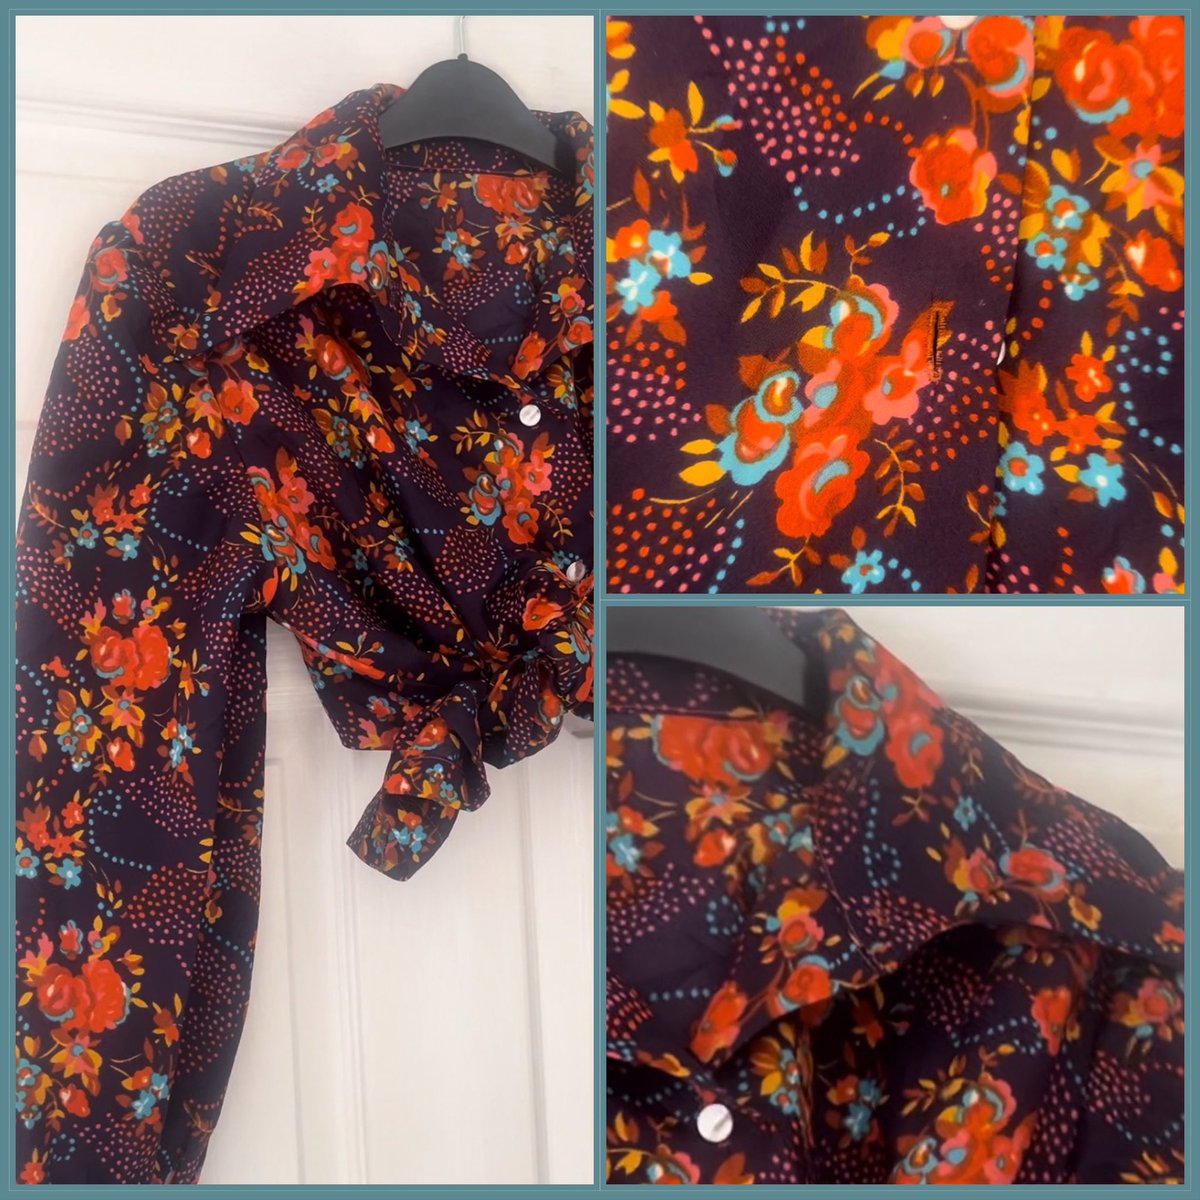 Finally getting around to sorting out all my retro vintage clothes that I have collected over the years 😀 Better get them sunglasses ready because they’re all bold and bright like this one 😀 #MHHSBD #craftbizparty #elevenseshour #UKMakers